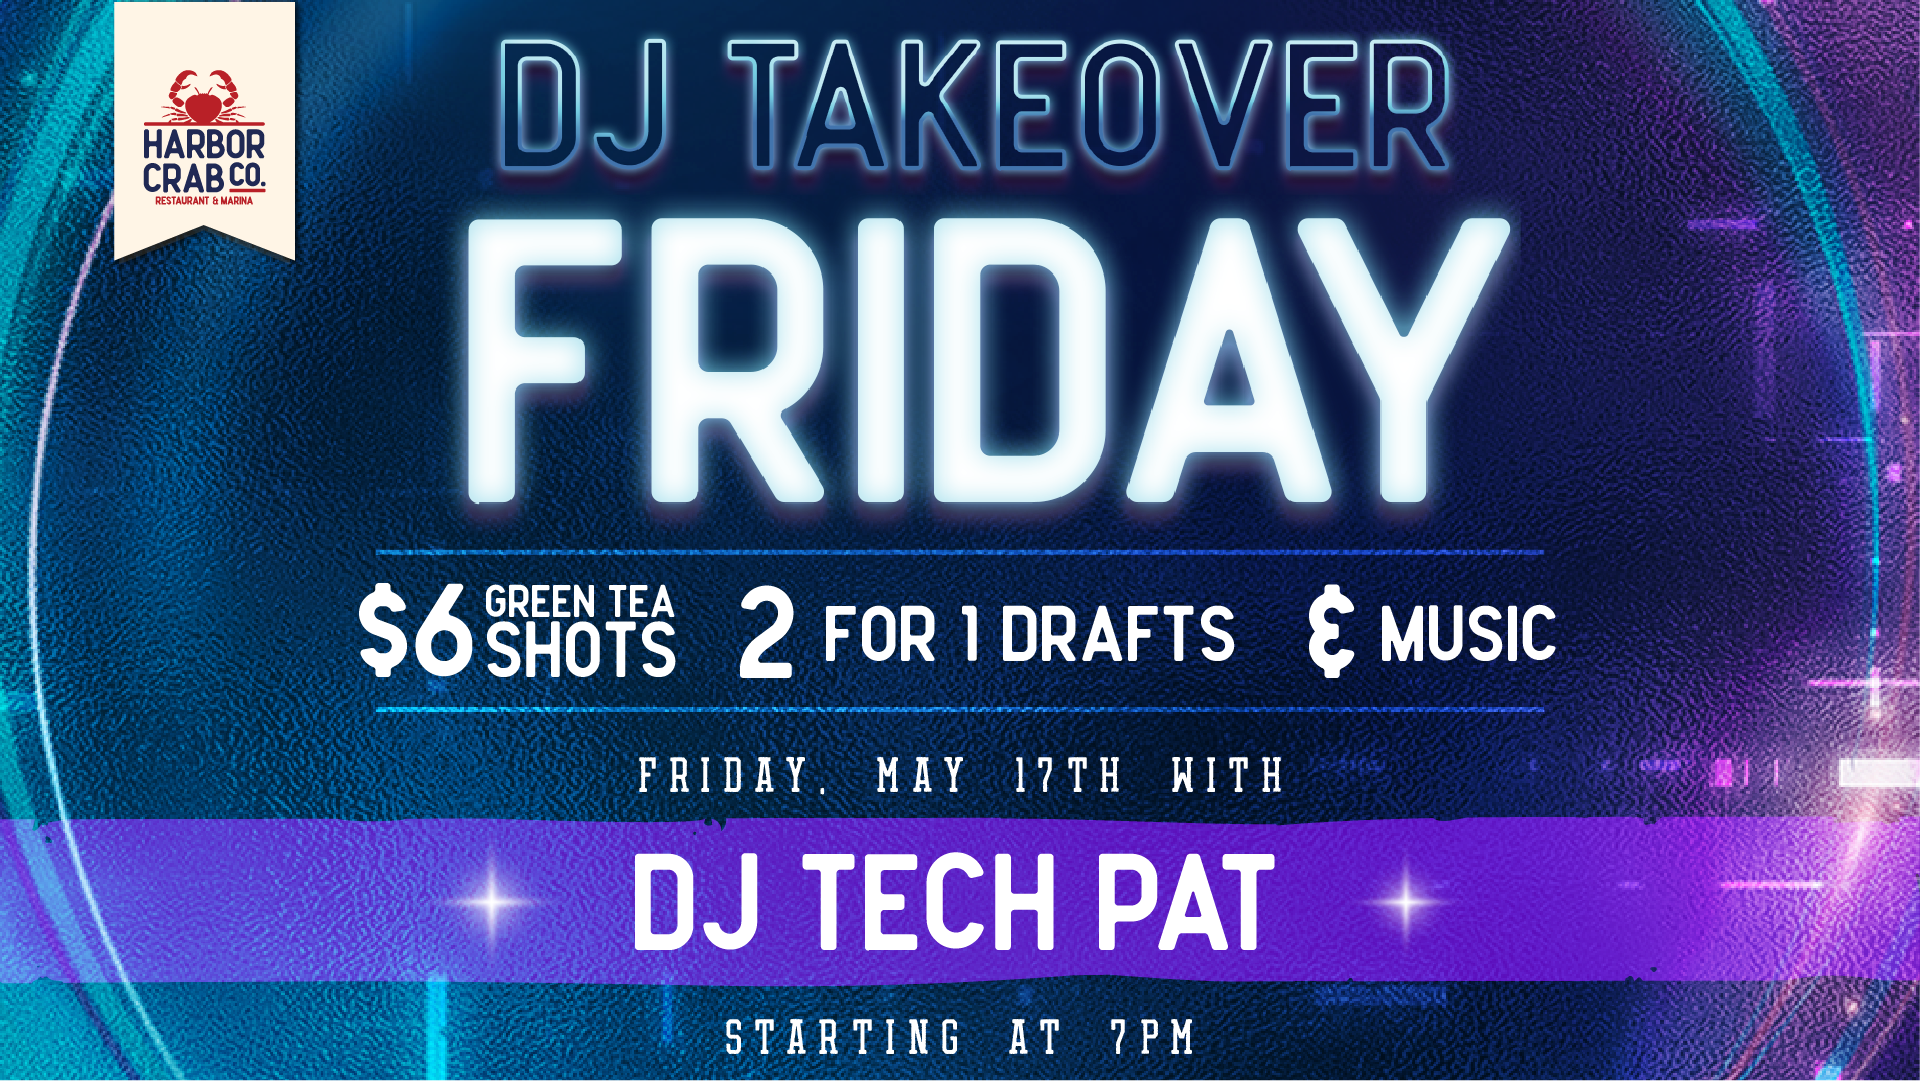 DJ Takeover with DJ Tech Pat at Harbor Crab on May 17th, starting at 7 pm. Don't miss $6 green tea shots and 2-for-1 draft beers.